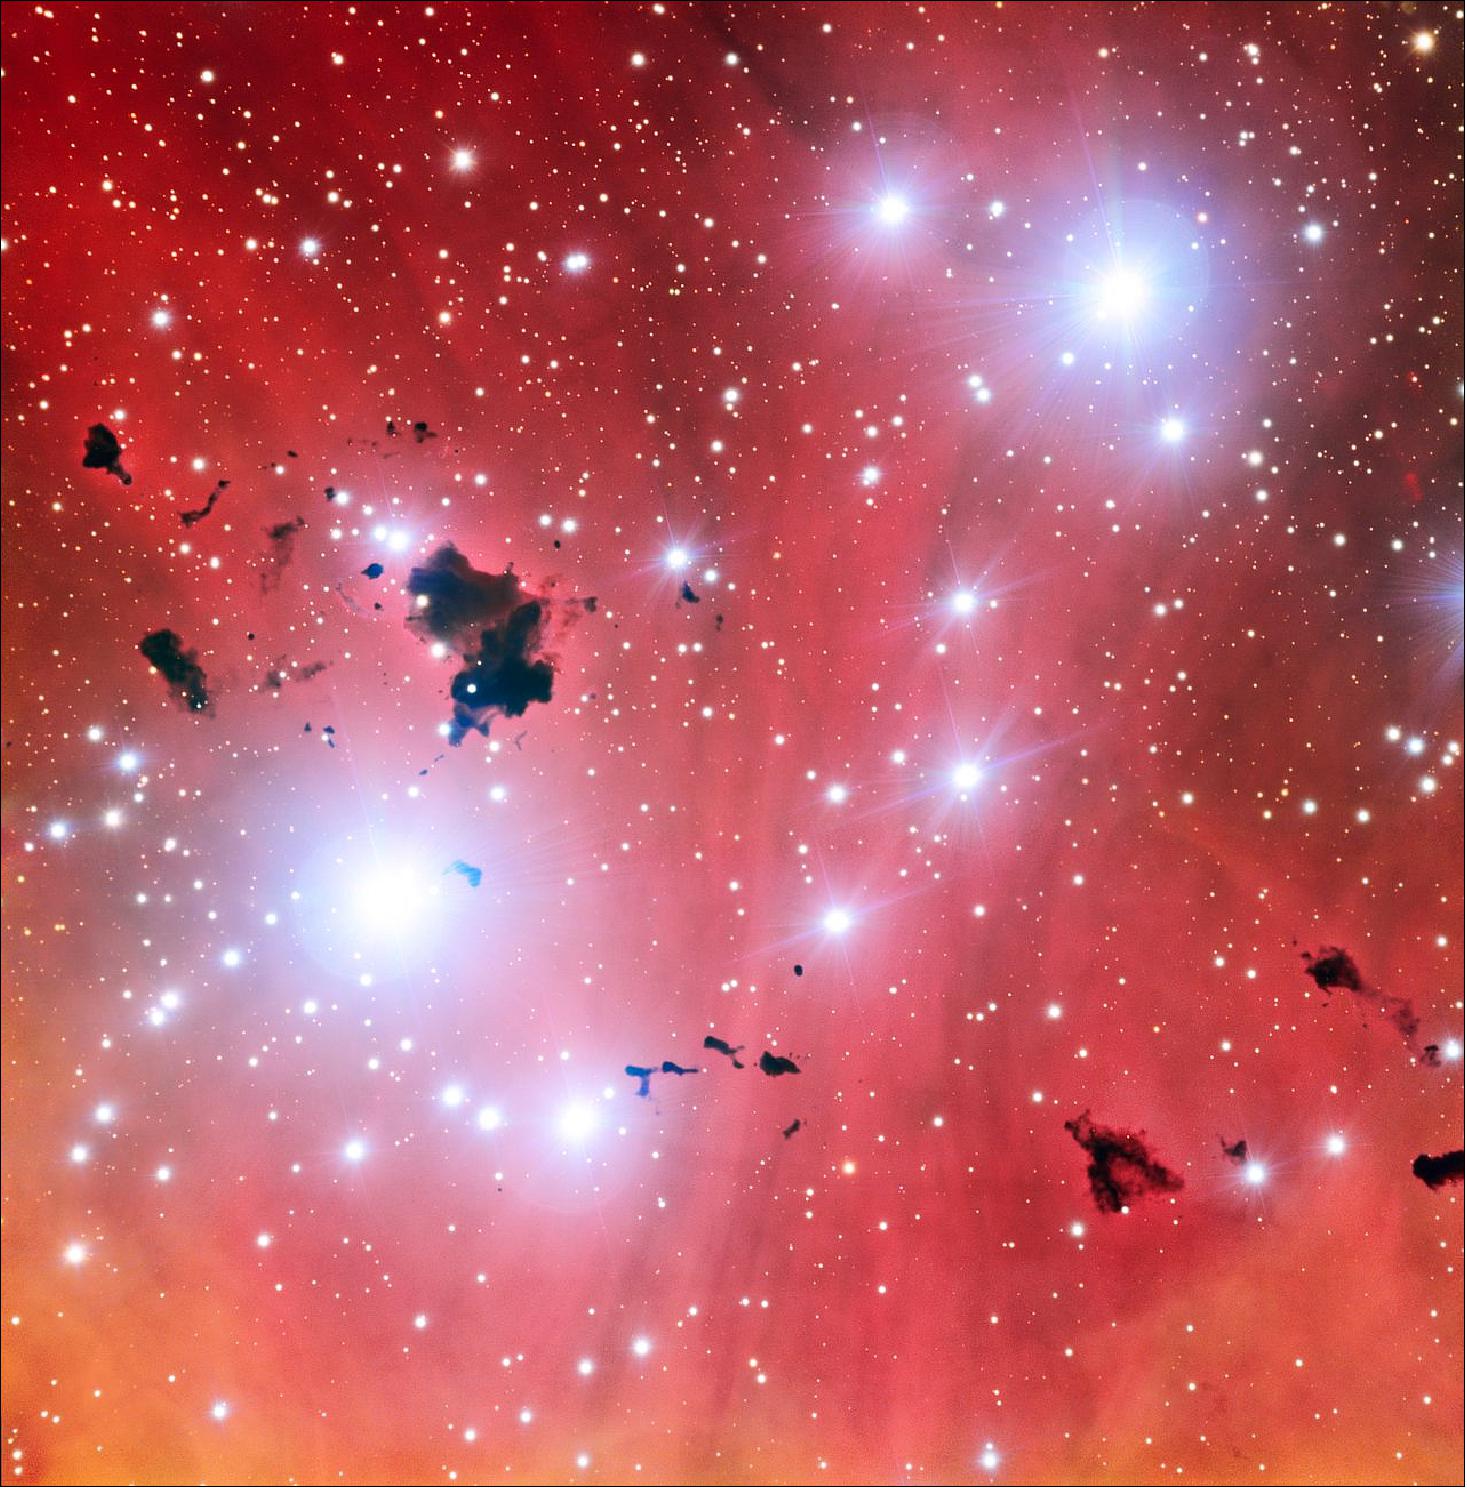 Figure 82: With this new view of a spectacular stellar nursery ESO is celebrating 15 years of the Very Large Telescope — the world's most advanced optical instrument. This picture reveals thick clumps of dust silhouetted against the pink glowing gas cloud known to astronomers as IC 2944. These opaque blobs resemble drops of ink floating in a strawberry cocktail, their whimsical shapes sculpted by powerful radiation coming from the nearby brilliant young stars (image credit: ESO)